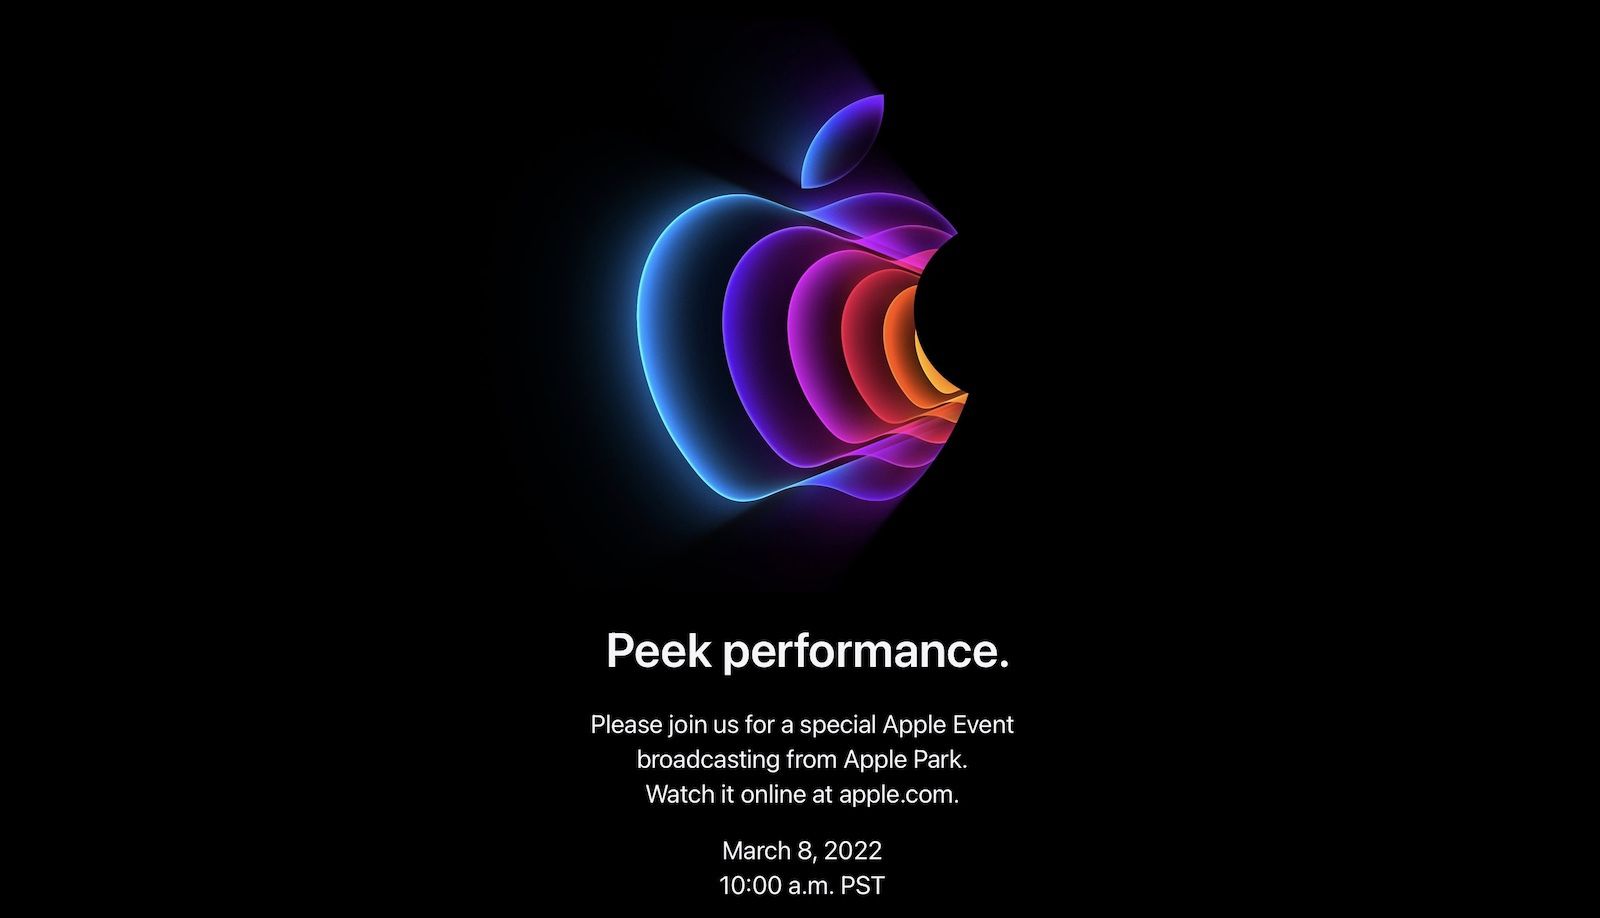 The “Rumors” About Apple’s March Event Were True (this time also)